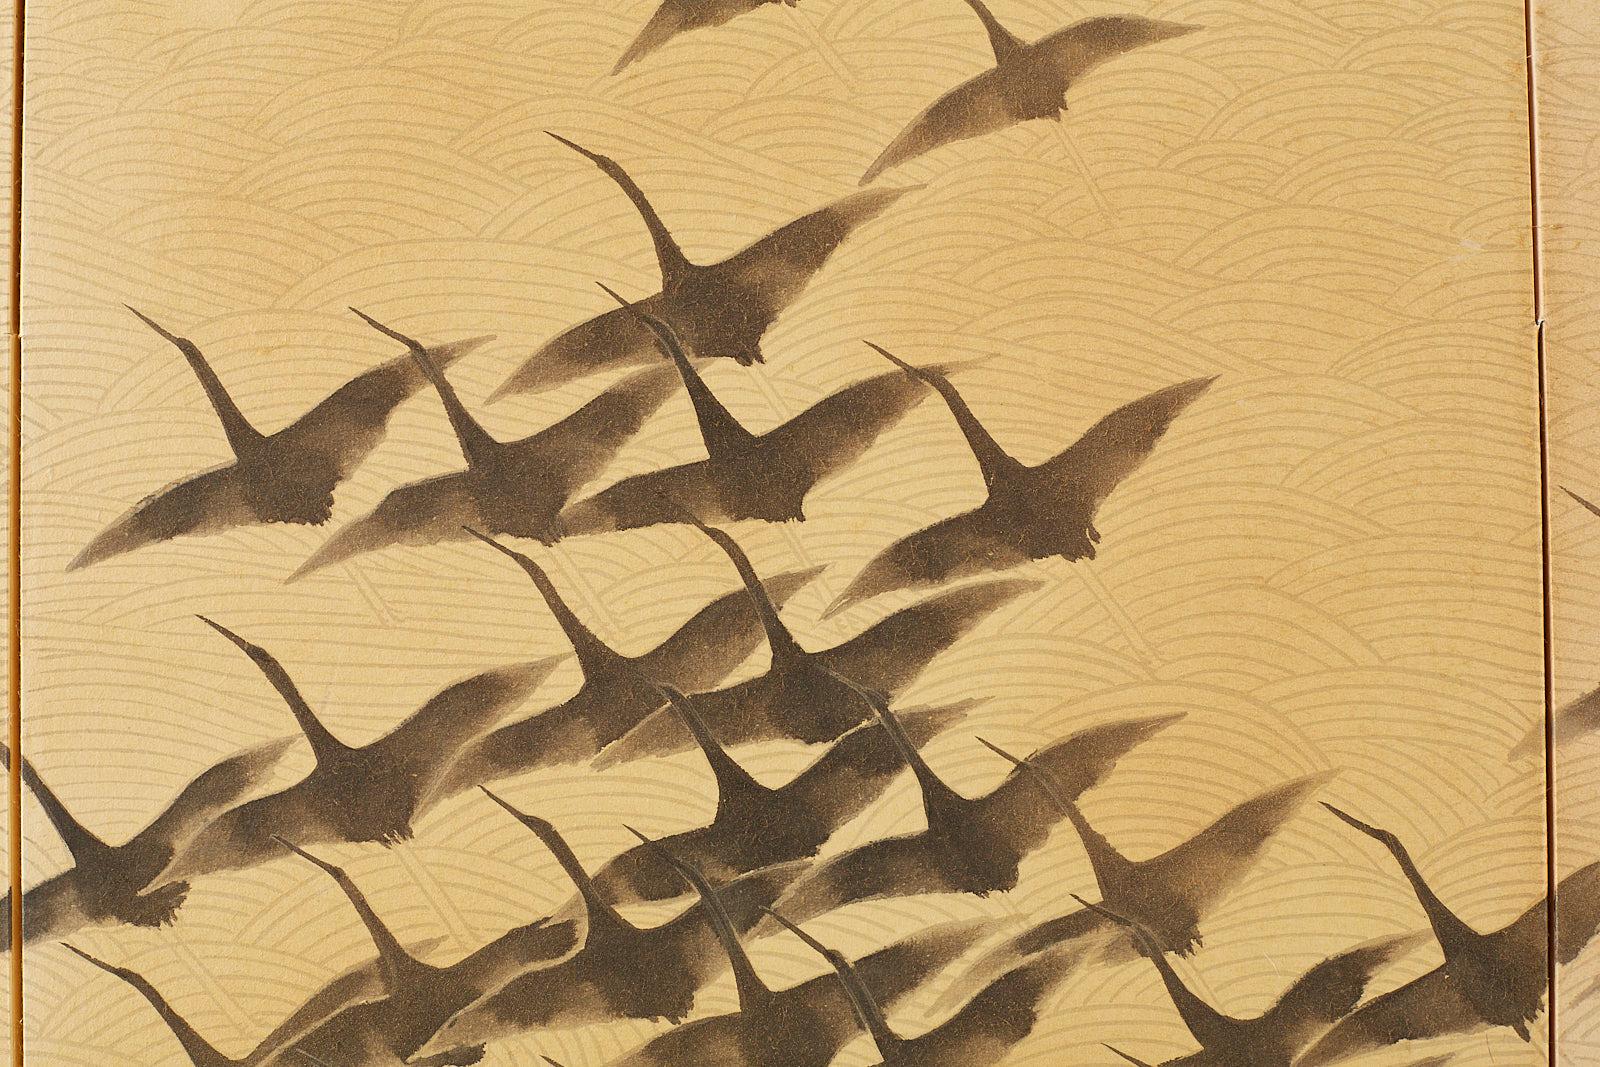 Japanese Four-Panel Screen Wild Geese in Flight 4